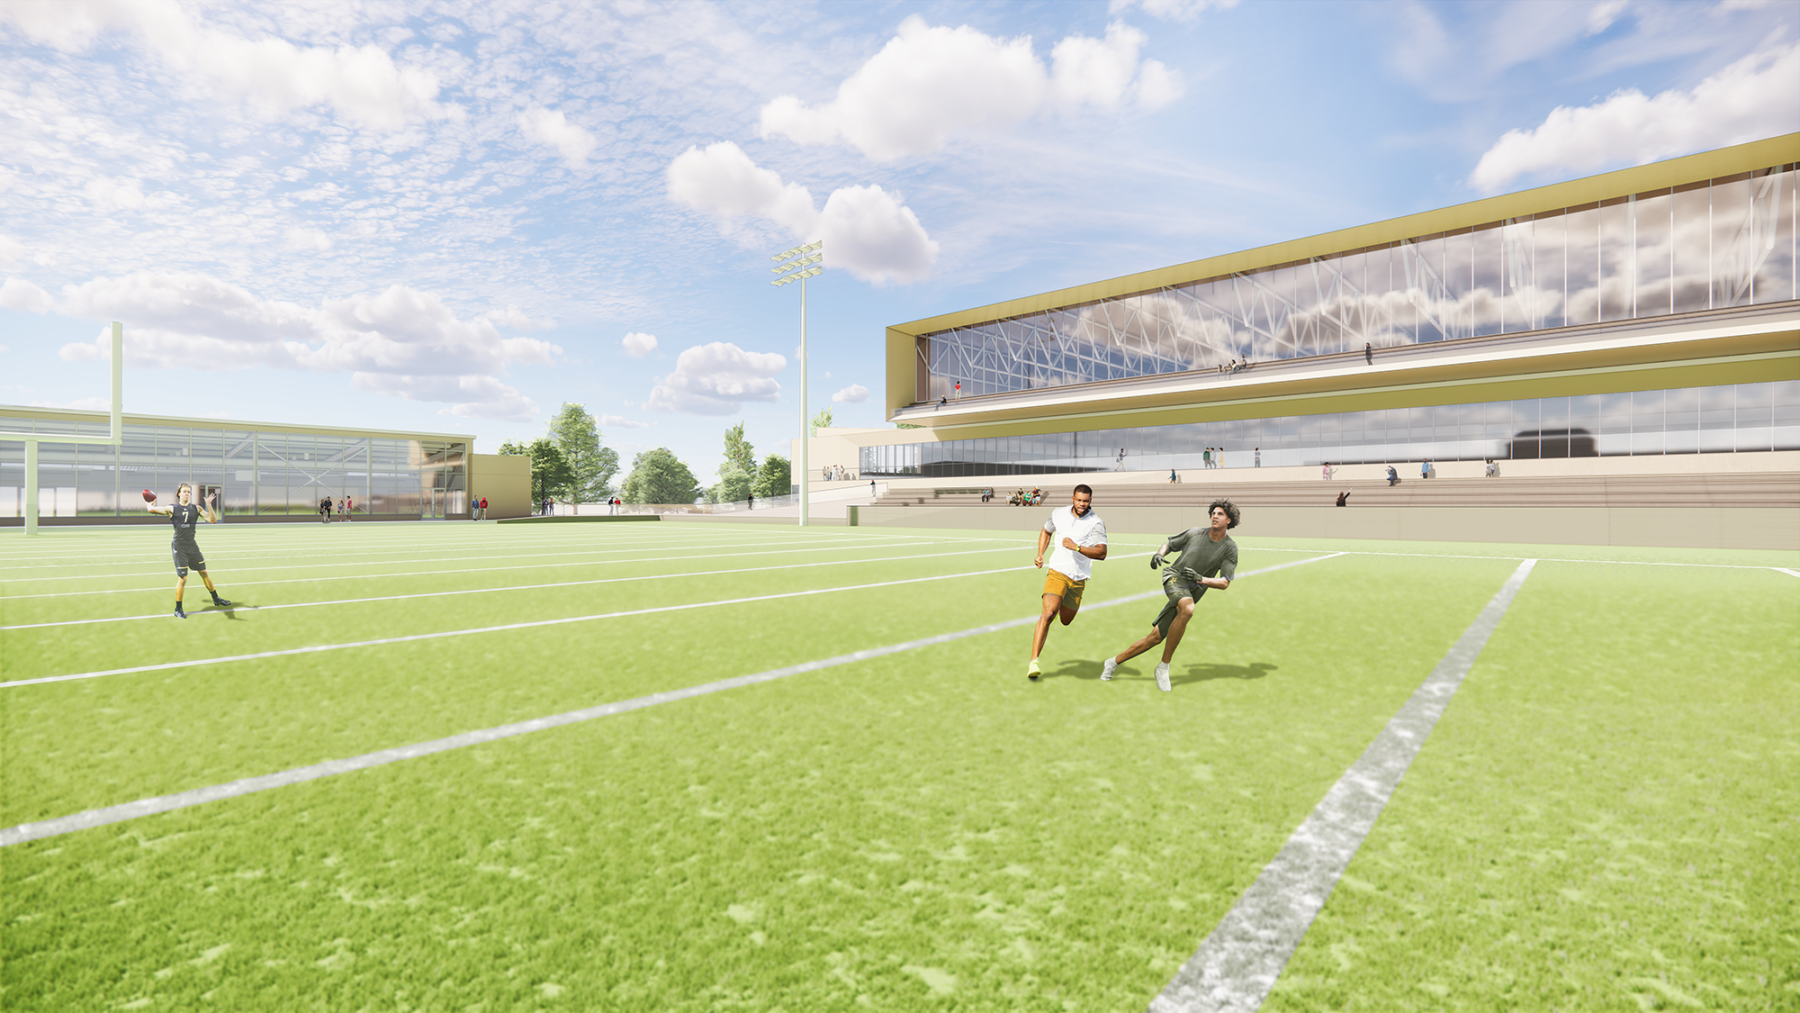 Rendering of students playing soccer in field in front of the new Bryant University Convocation Center